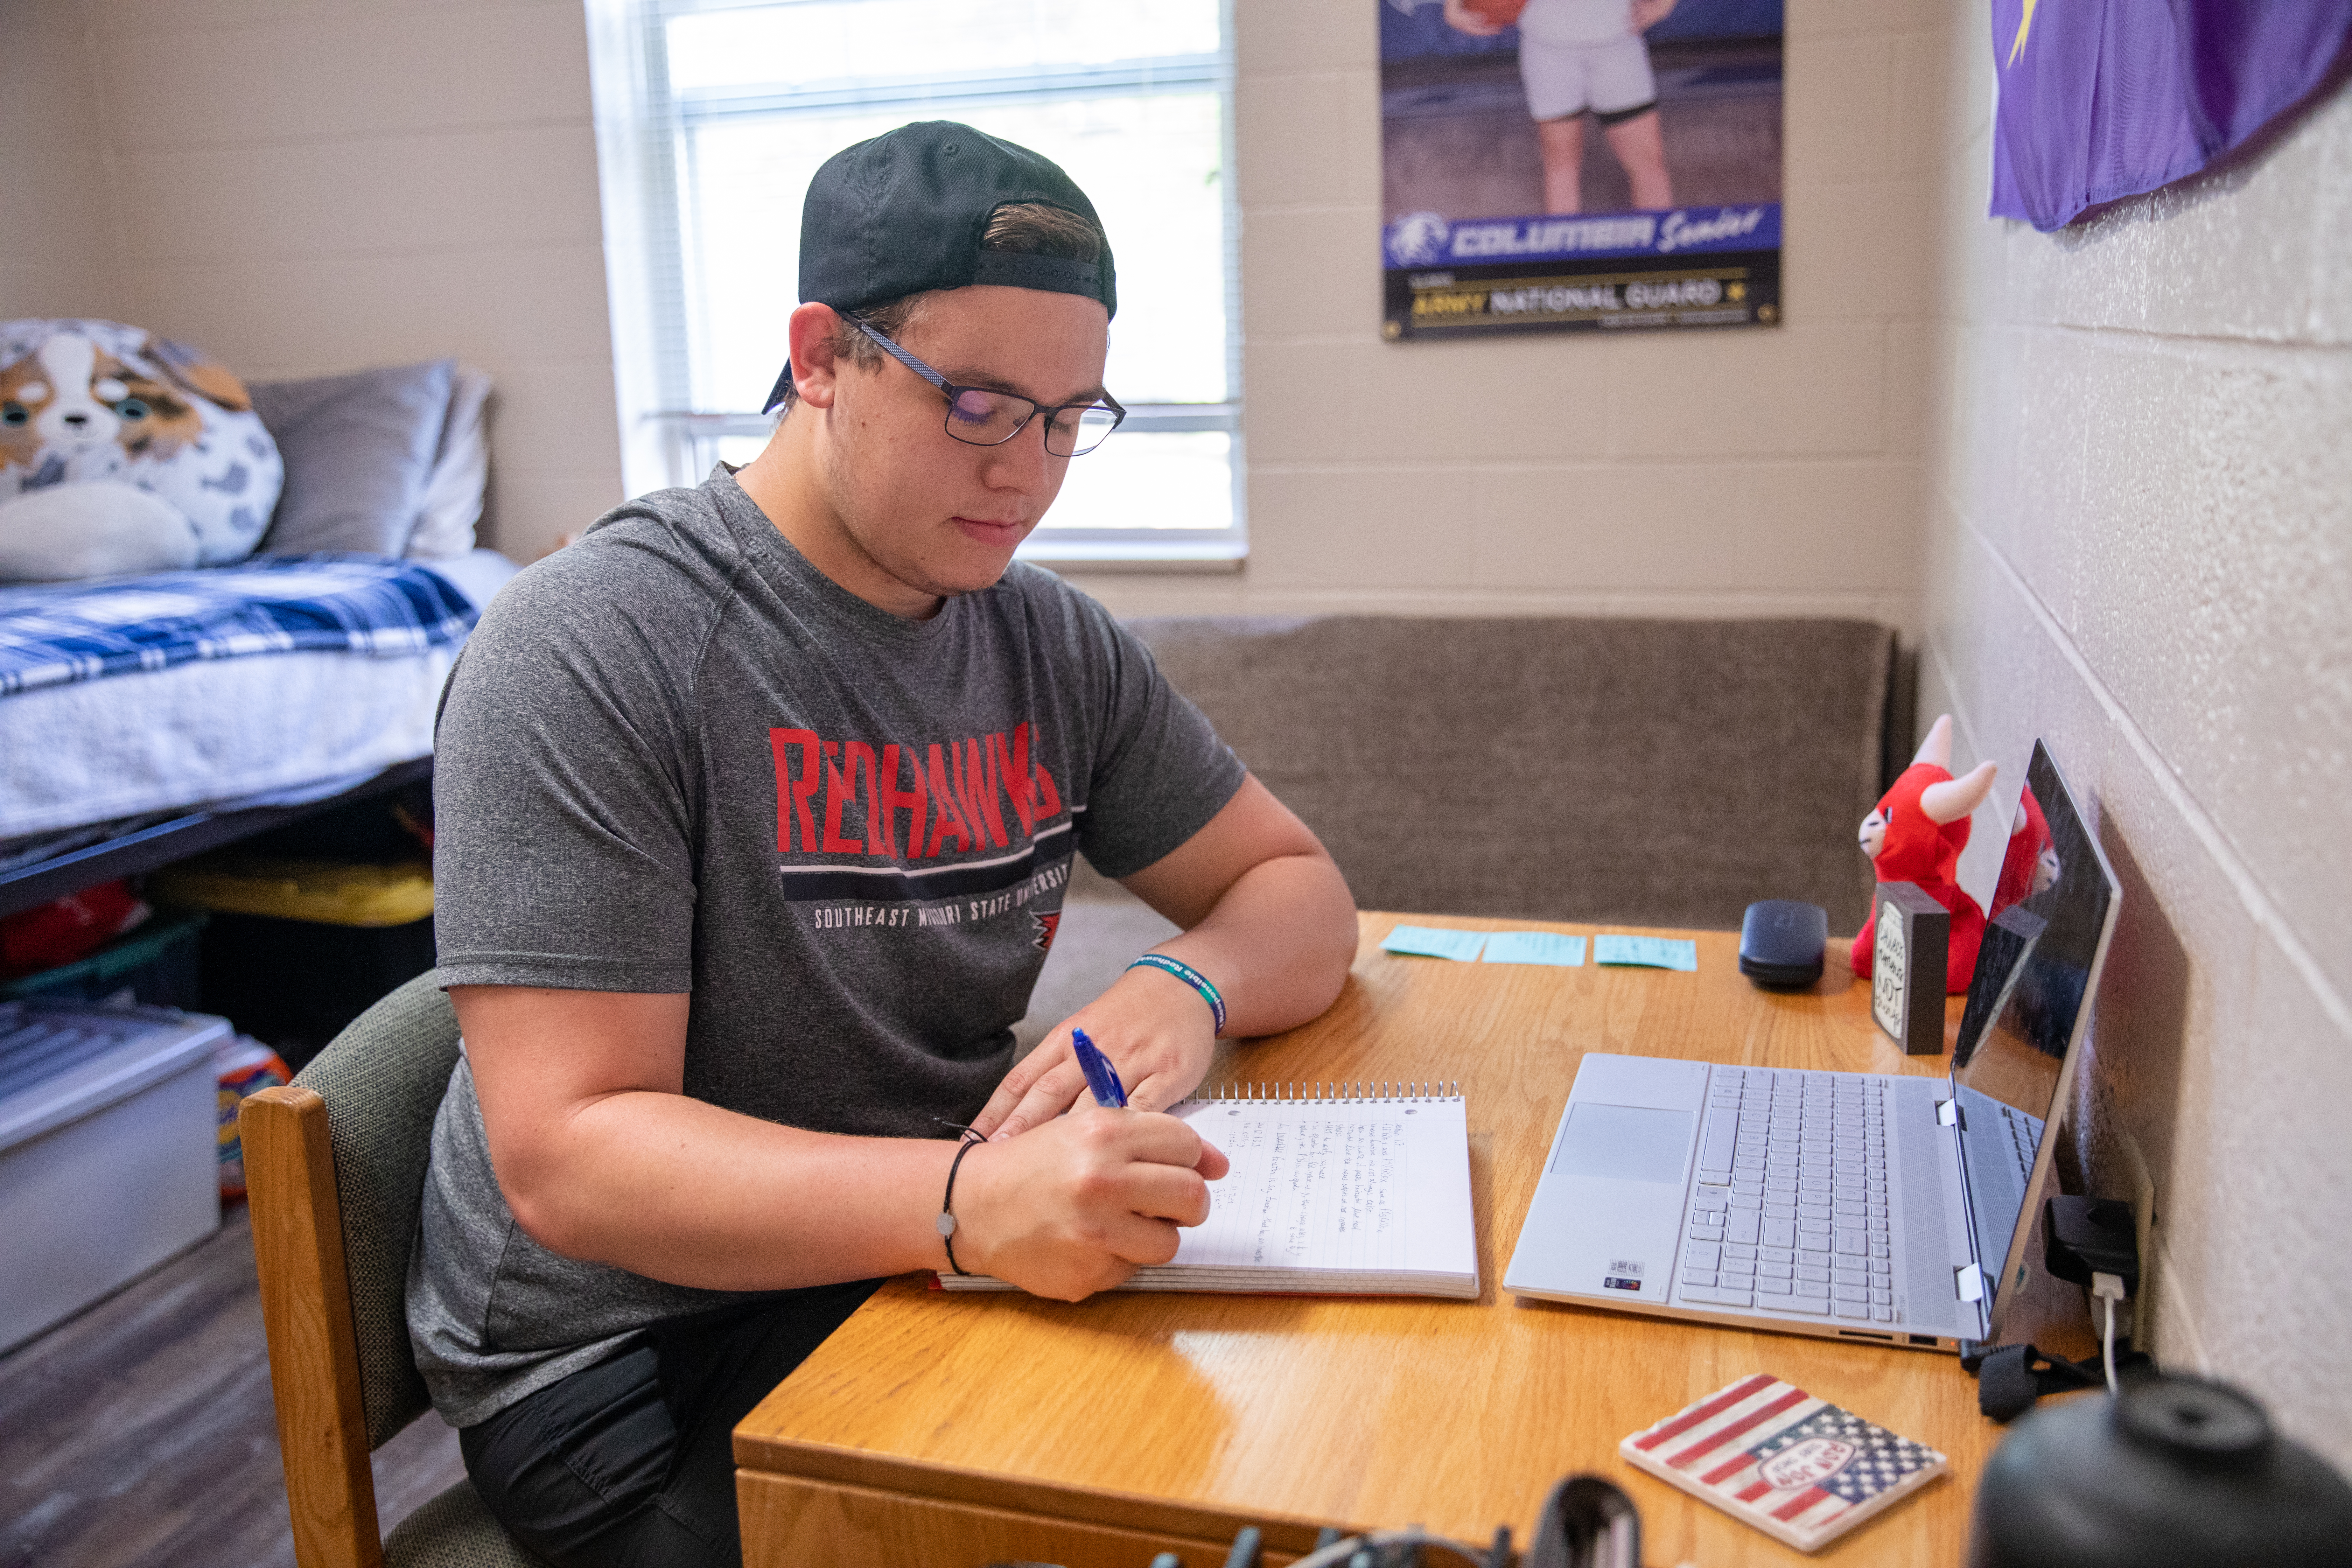 Student sitting at desk in dorm room writing in notebook. 